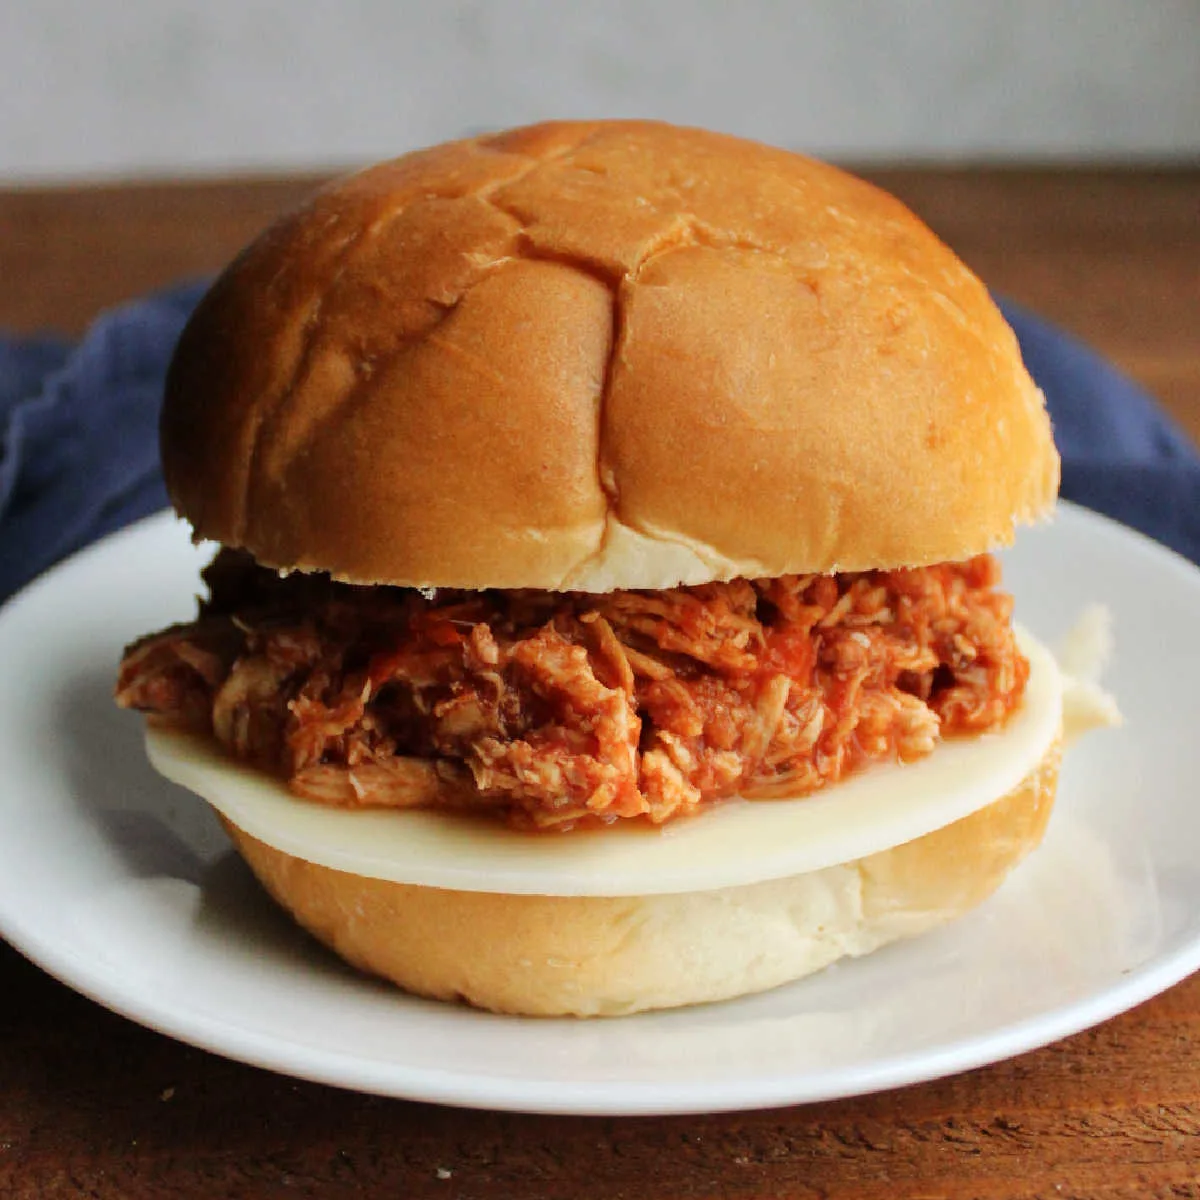 Sandwich made from bun, provolone cheese, and shredded marinara to make a tasty chicken parm sandwich with a crockpot filling.